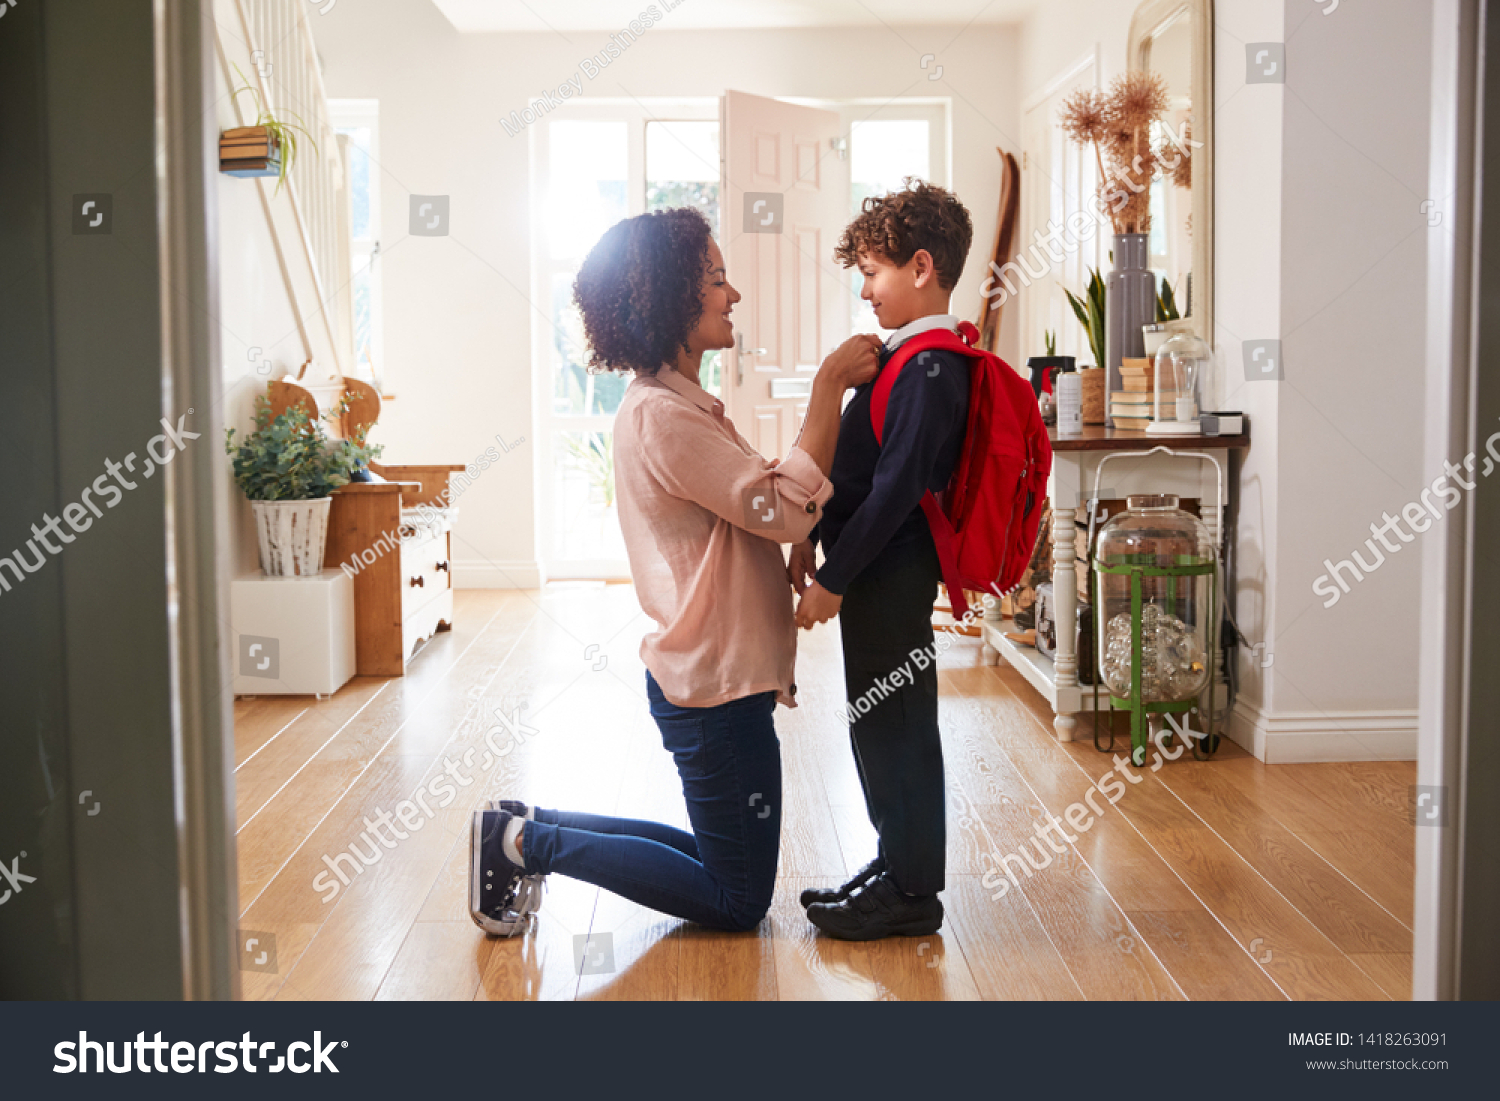 Single Mother At Home Getting Son Wearing Uniform Ready For First Day Of School #1418263091